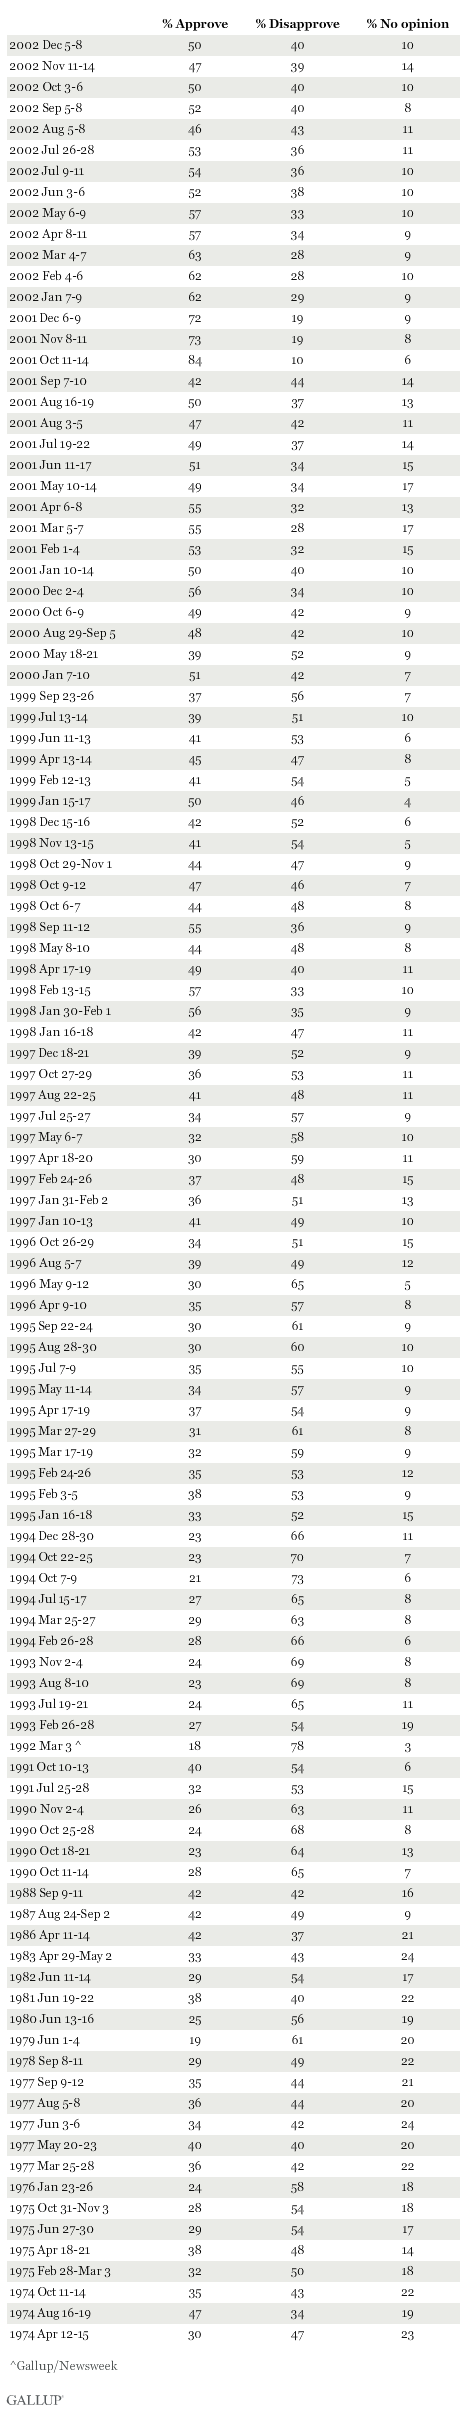 Trend: Do you approve or disapprove of the way Congress is handling its job? 1974-2002